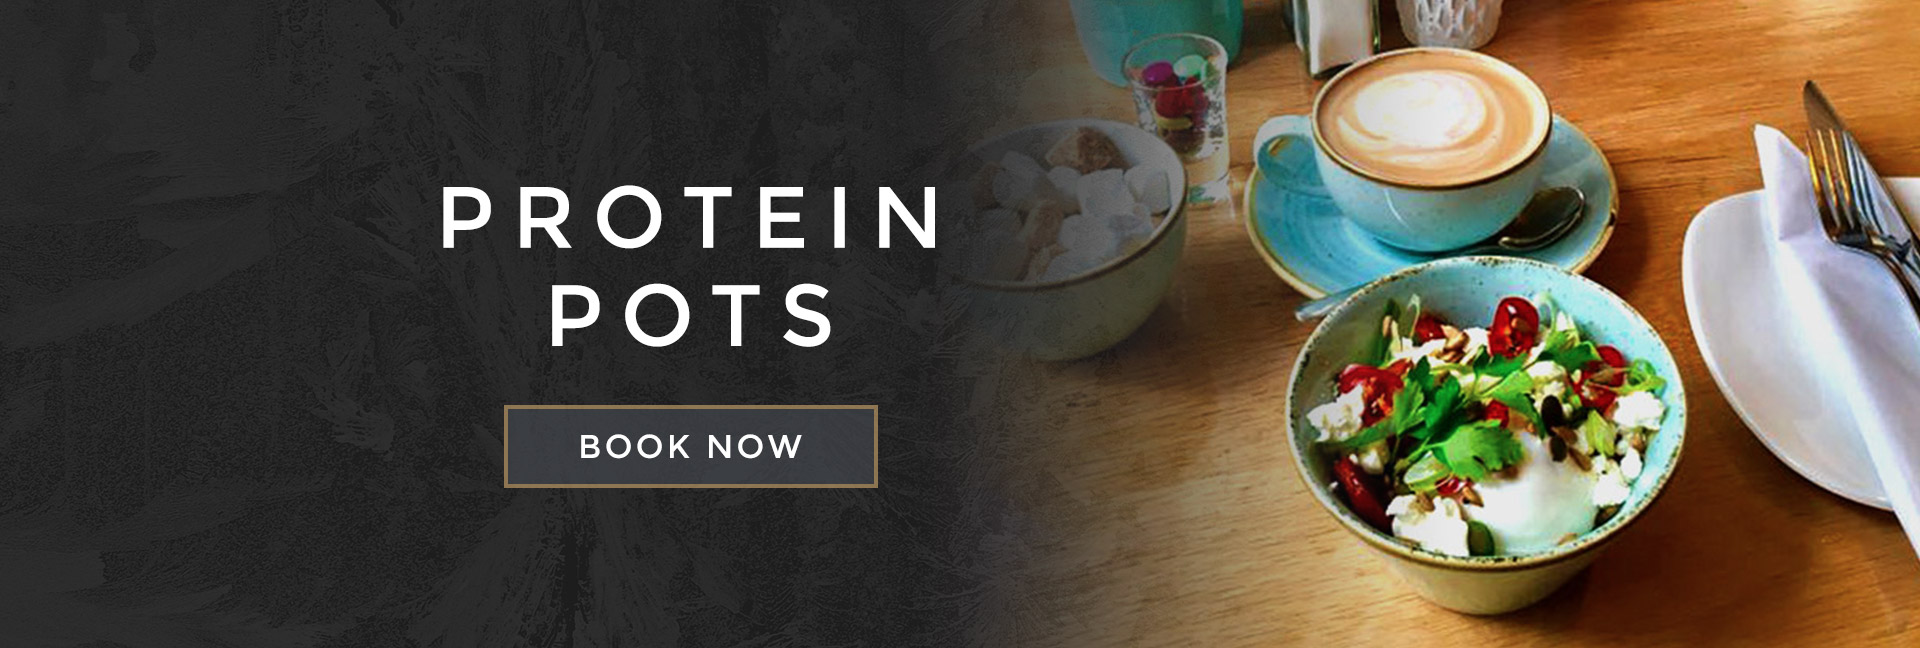 Protein pots at All Bar One Liverpool - Book your table